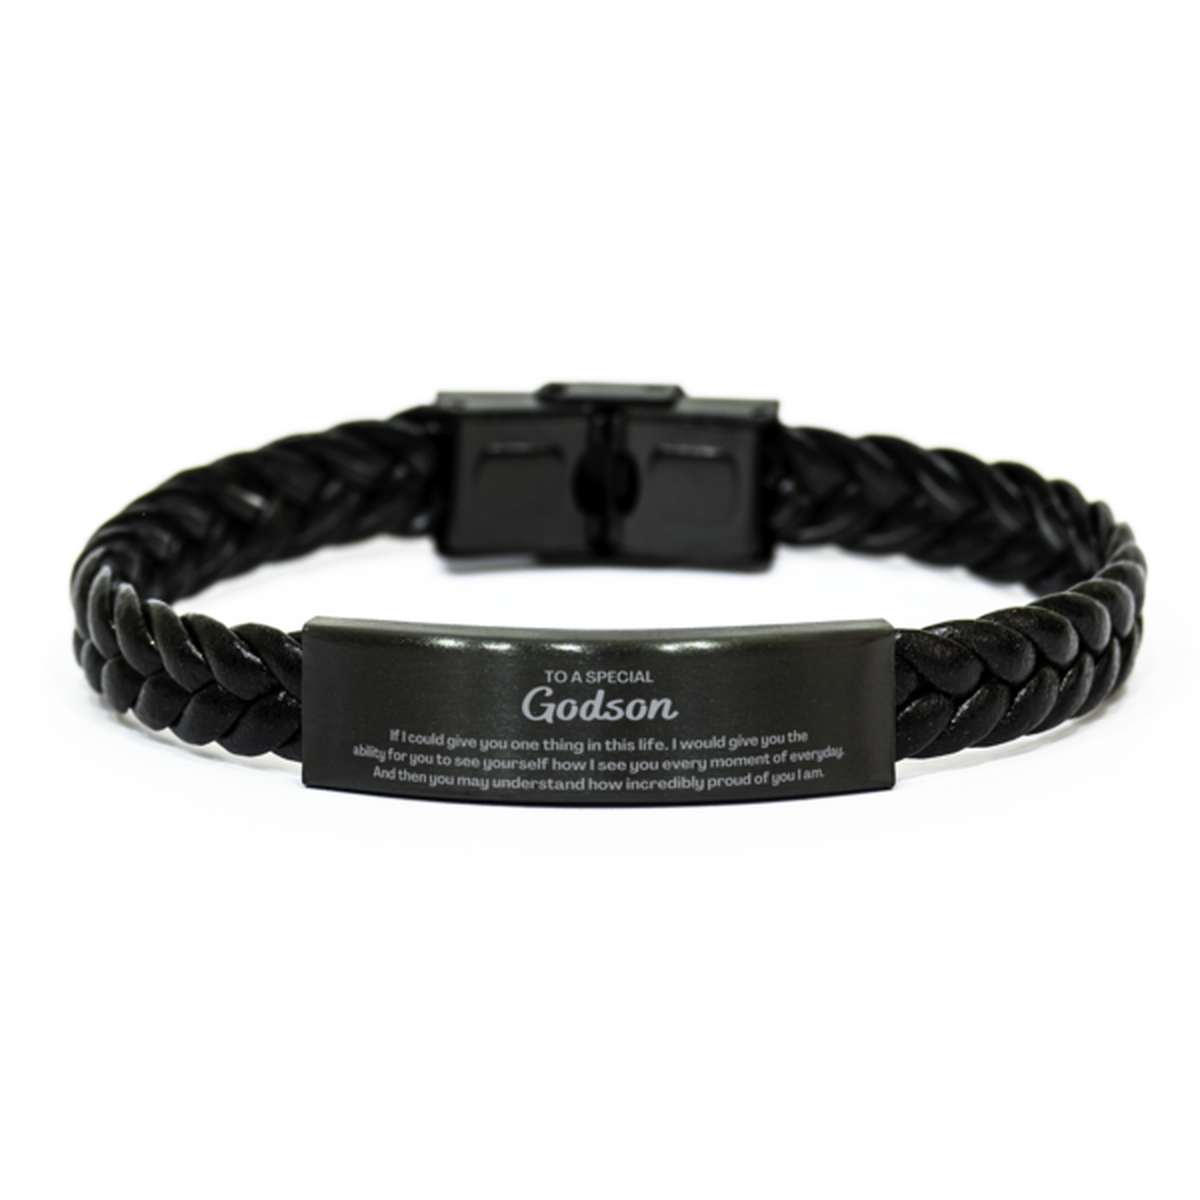 To My Godson Braided Leather Bracelet, Gifts For Godson Engraved, Inspirational Gifts for Christmas Birthday, Epic Gifts for Godson To A Special Godson how incredibly proud of you I am